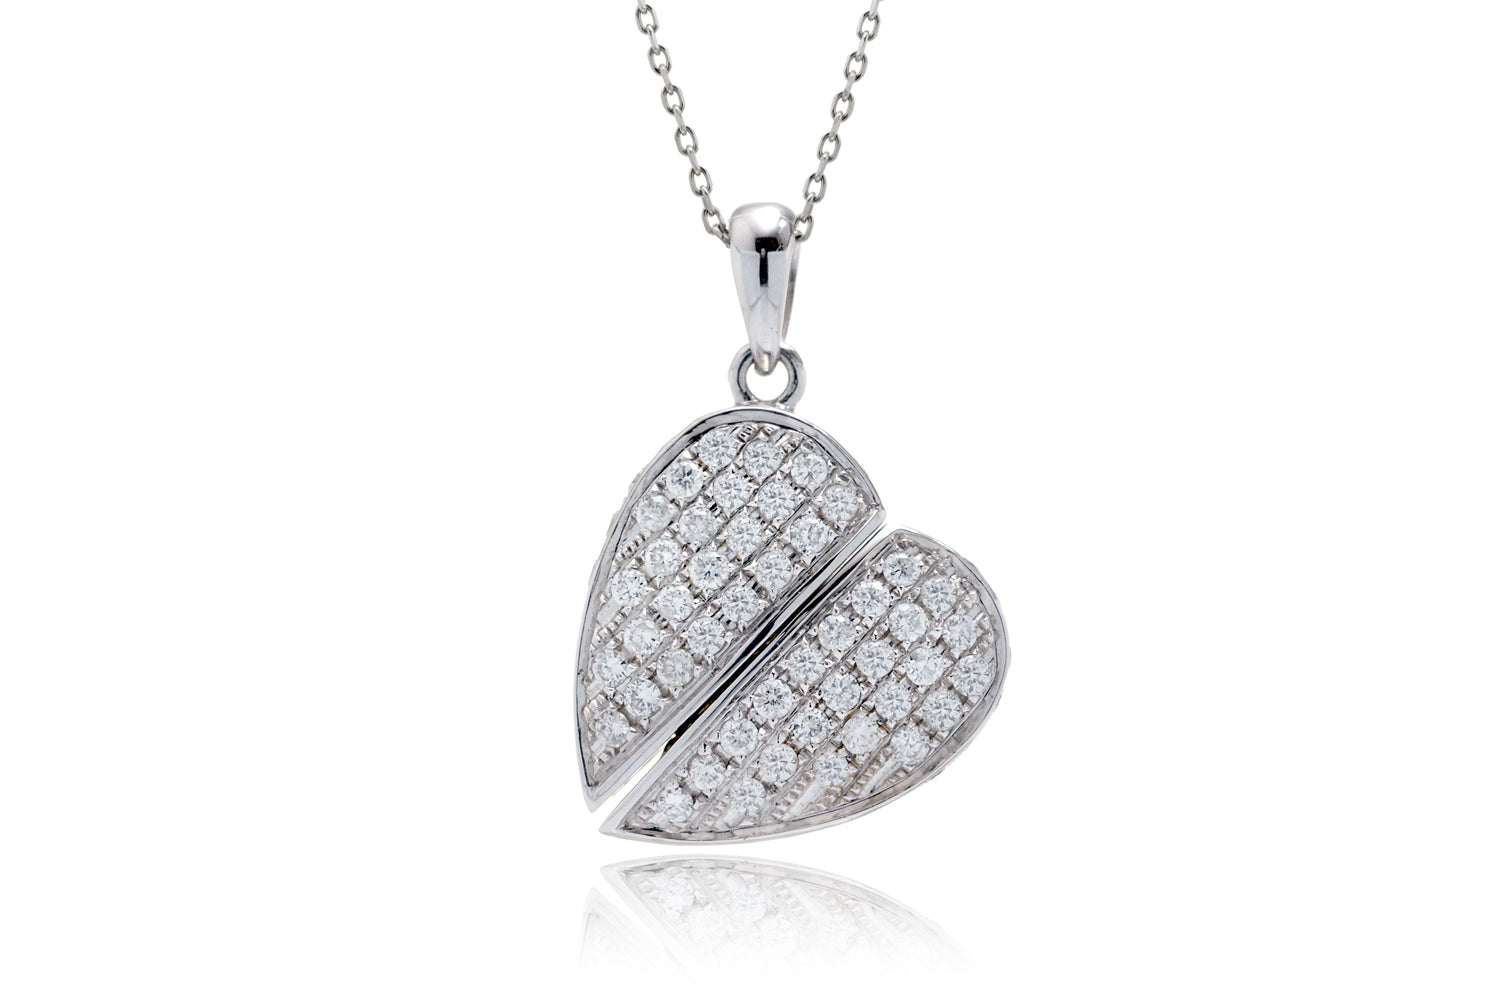 Louis Vuitton Lockit Pendant Necklace 18K White Gold and Pave